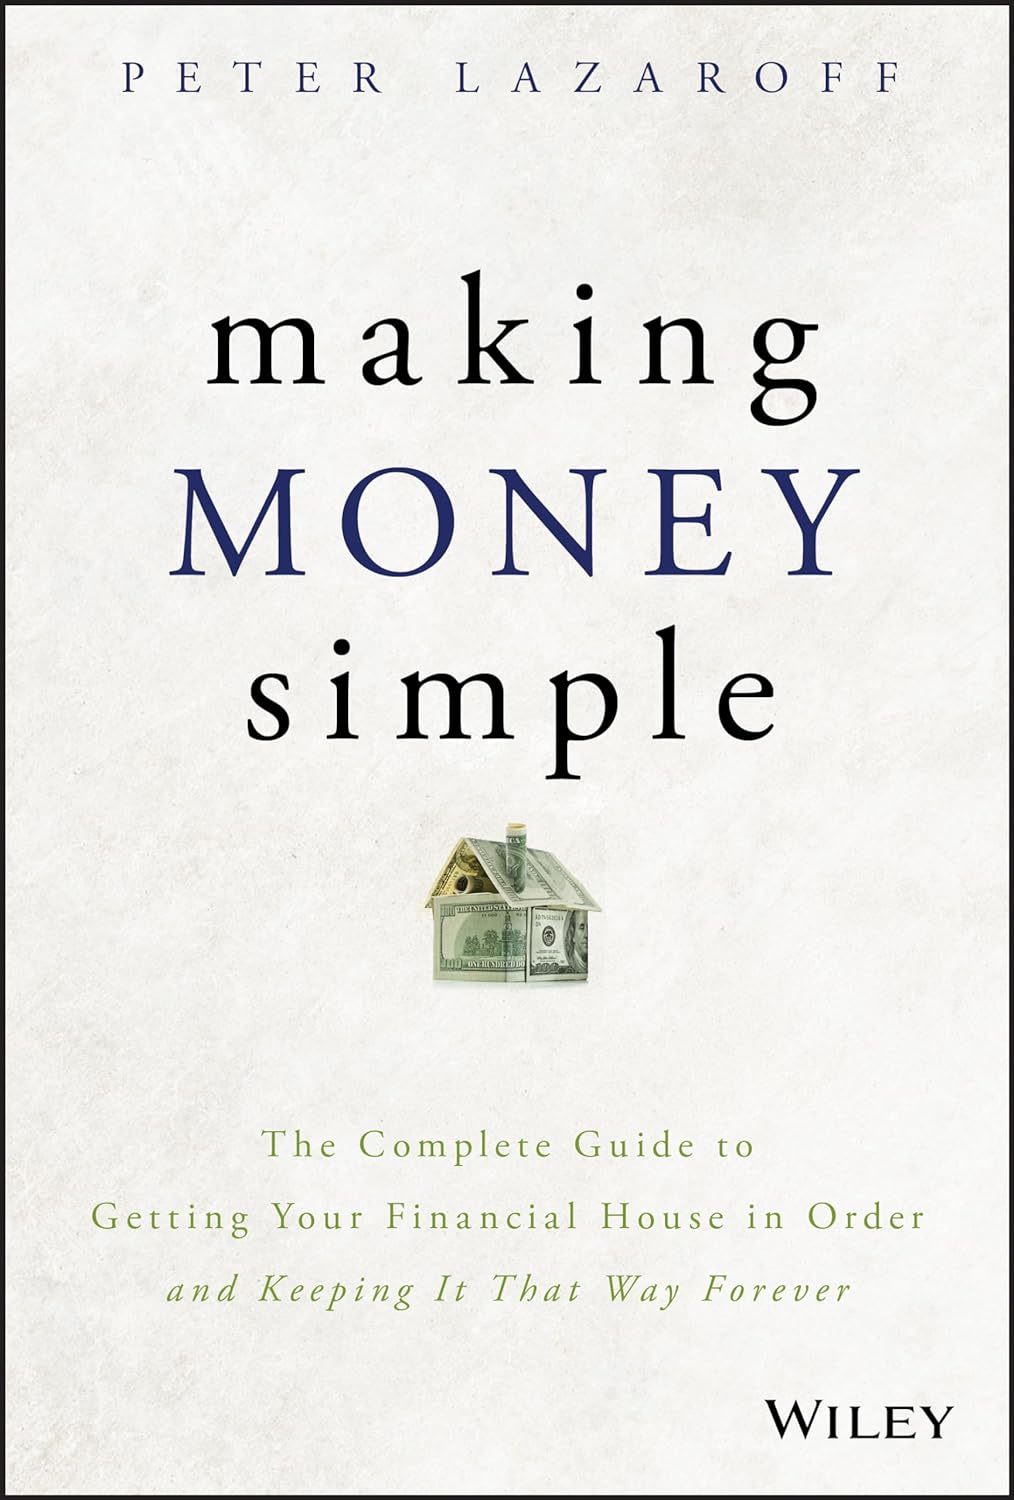 Simplify your financial life and ensure financial success into the future  Feeling paralyzed by the overwhelming number of complex decisions you need to make with your money?  You don’t need to be an expert to achieve financial freedom. You just need a framework that makes the right choices simple and easy to make. Making Money Simple provides that much-needed process so you can get on the right track to long-term financial security.  This valuable resource provides a solid foundation for all the nuanced personal finance decisions you need to make as you go through your career, hit major life milestones, and look to grow wealth. It’s a blueprint for financial achievement—even through tough-to-navigate situations where there are no clear-cut rules.  After you read Making Money Simple, you’ll be able to create your personal plan for success using proven wealth management methods and real-world financial strategies. From basic financial principles to advanced investing techniques, you’ll get comprehensive coverage of fundamental financial topics with easy-to-follow advice from author Peter Lazaroff, who draws from his expertise as the Chief Investment Officer of a multi-billion-dollar wealth management firm to give you the tools you need to simplify your financial situation and make the right moves at every opportunity.  Getting your finances in order doesn’t have to be hard. It doesn’t require fancy, convoluted investment strategies. Nor does it require keeping track of detailed spreadsheets. You just need this step-by-step process to get your financial house in order and keep it that way forever.  It doesn’t matter what your specific situation is. We all need to understand our money—and what to do with it. Making Money Simple shows you how to:  Develop clear financial goals and plan for your future Understand the three crucial elements of building a strong financial house Implement effective investment strategies to grow your wealth and avoid costly mistakes Learn ten smart questions to ask when hiring financial professionals For those seeking to secure a solid financial future, Making Money Simple: A Complete Guide to Getting Your Financial House in Order and Keeping It That Way Forever is the roadmap to get you there.